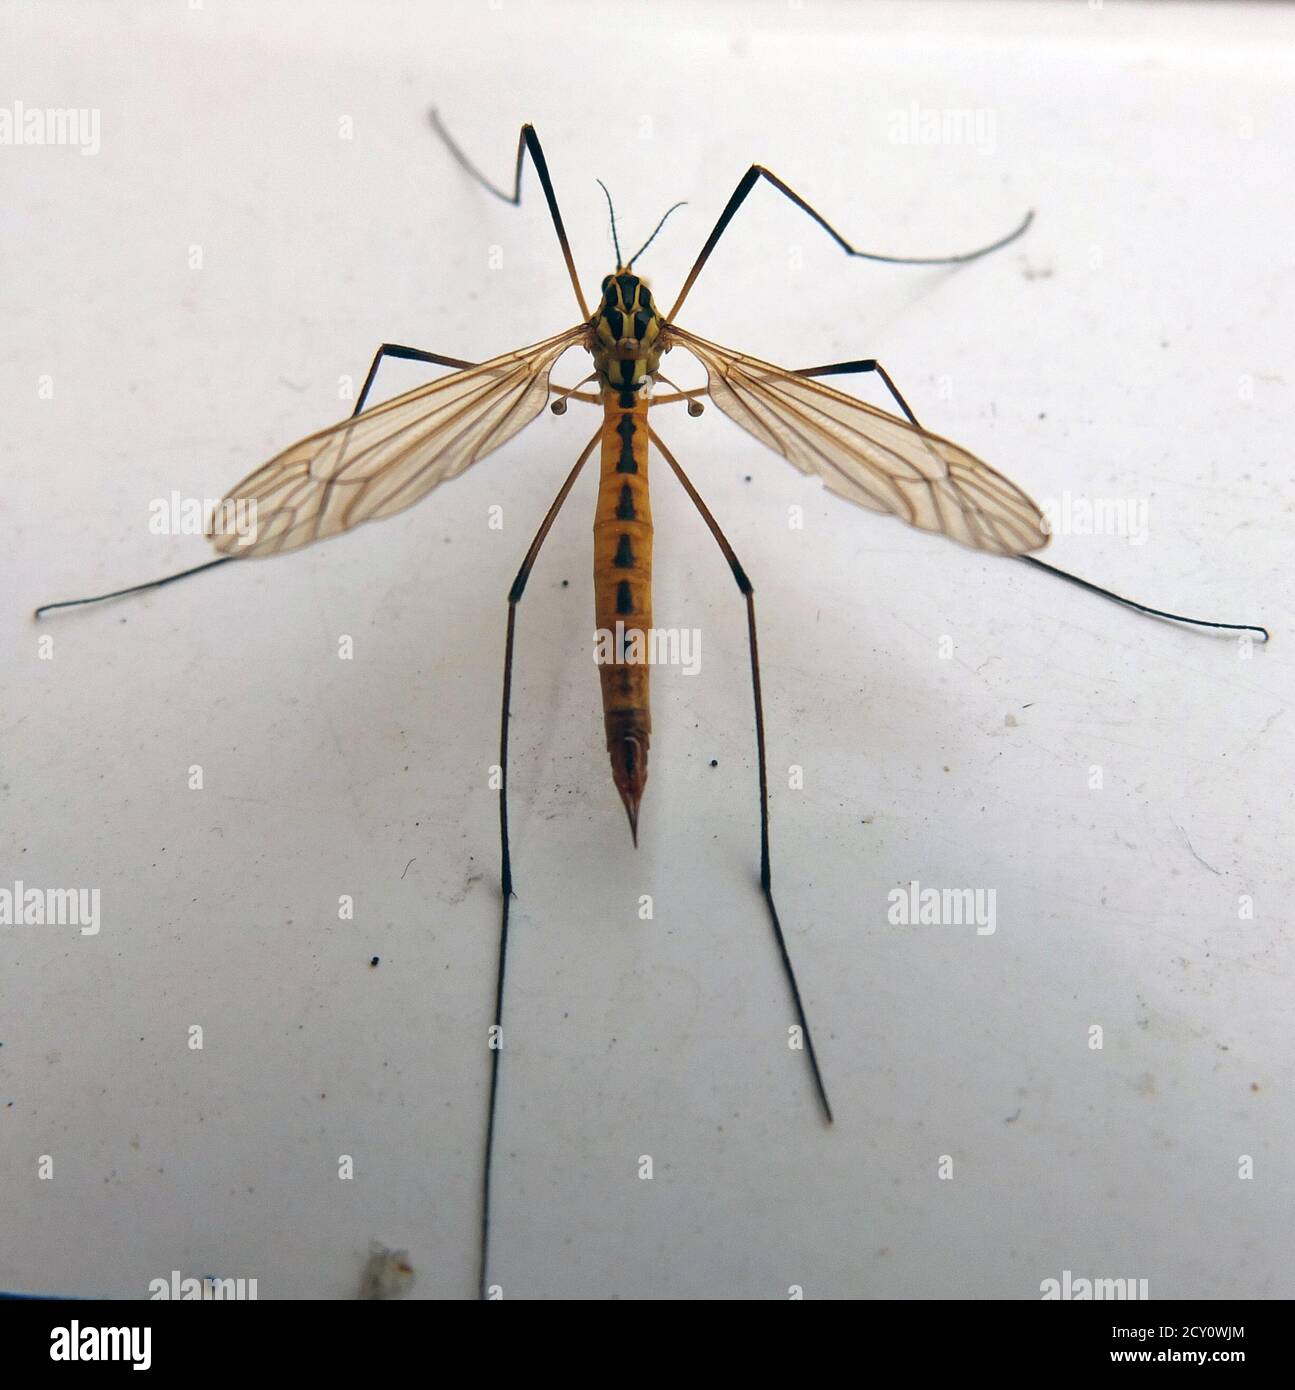 Crane fly / Daddy long legs top view. Harmless to humans but an agricultural pest in Europe. Also known as Galli Nipper, Golly Whopper, Mosquito Hawk. Stock Photo